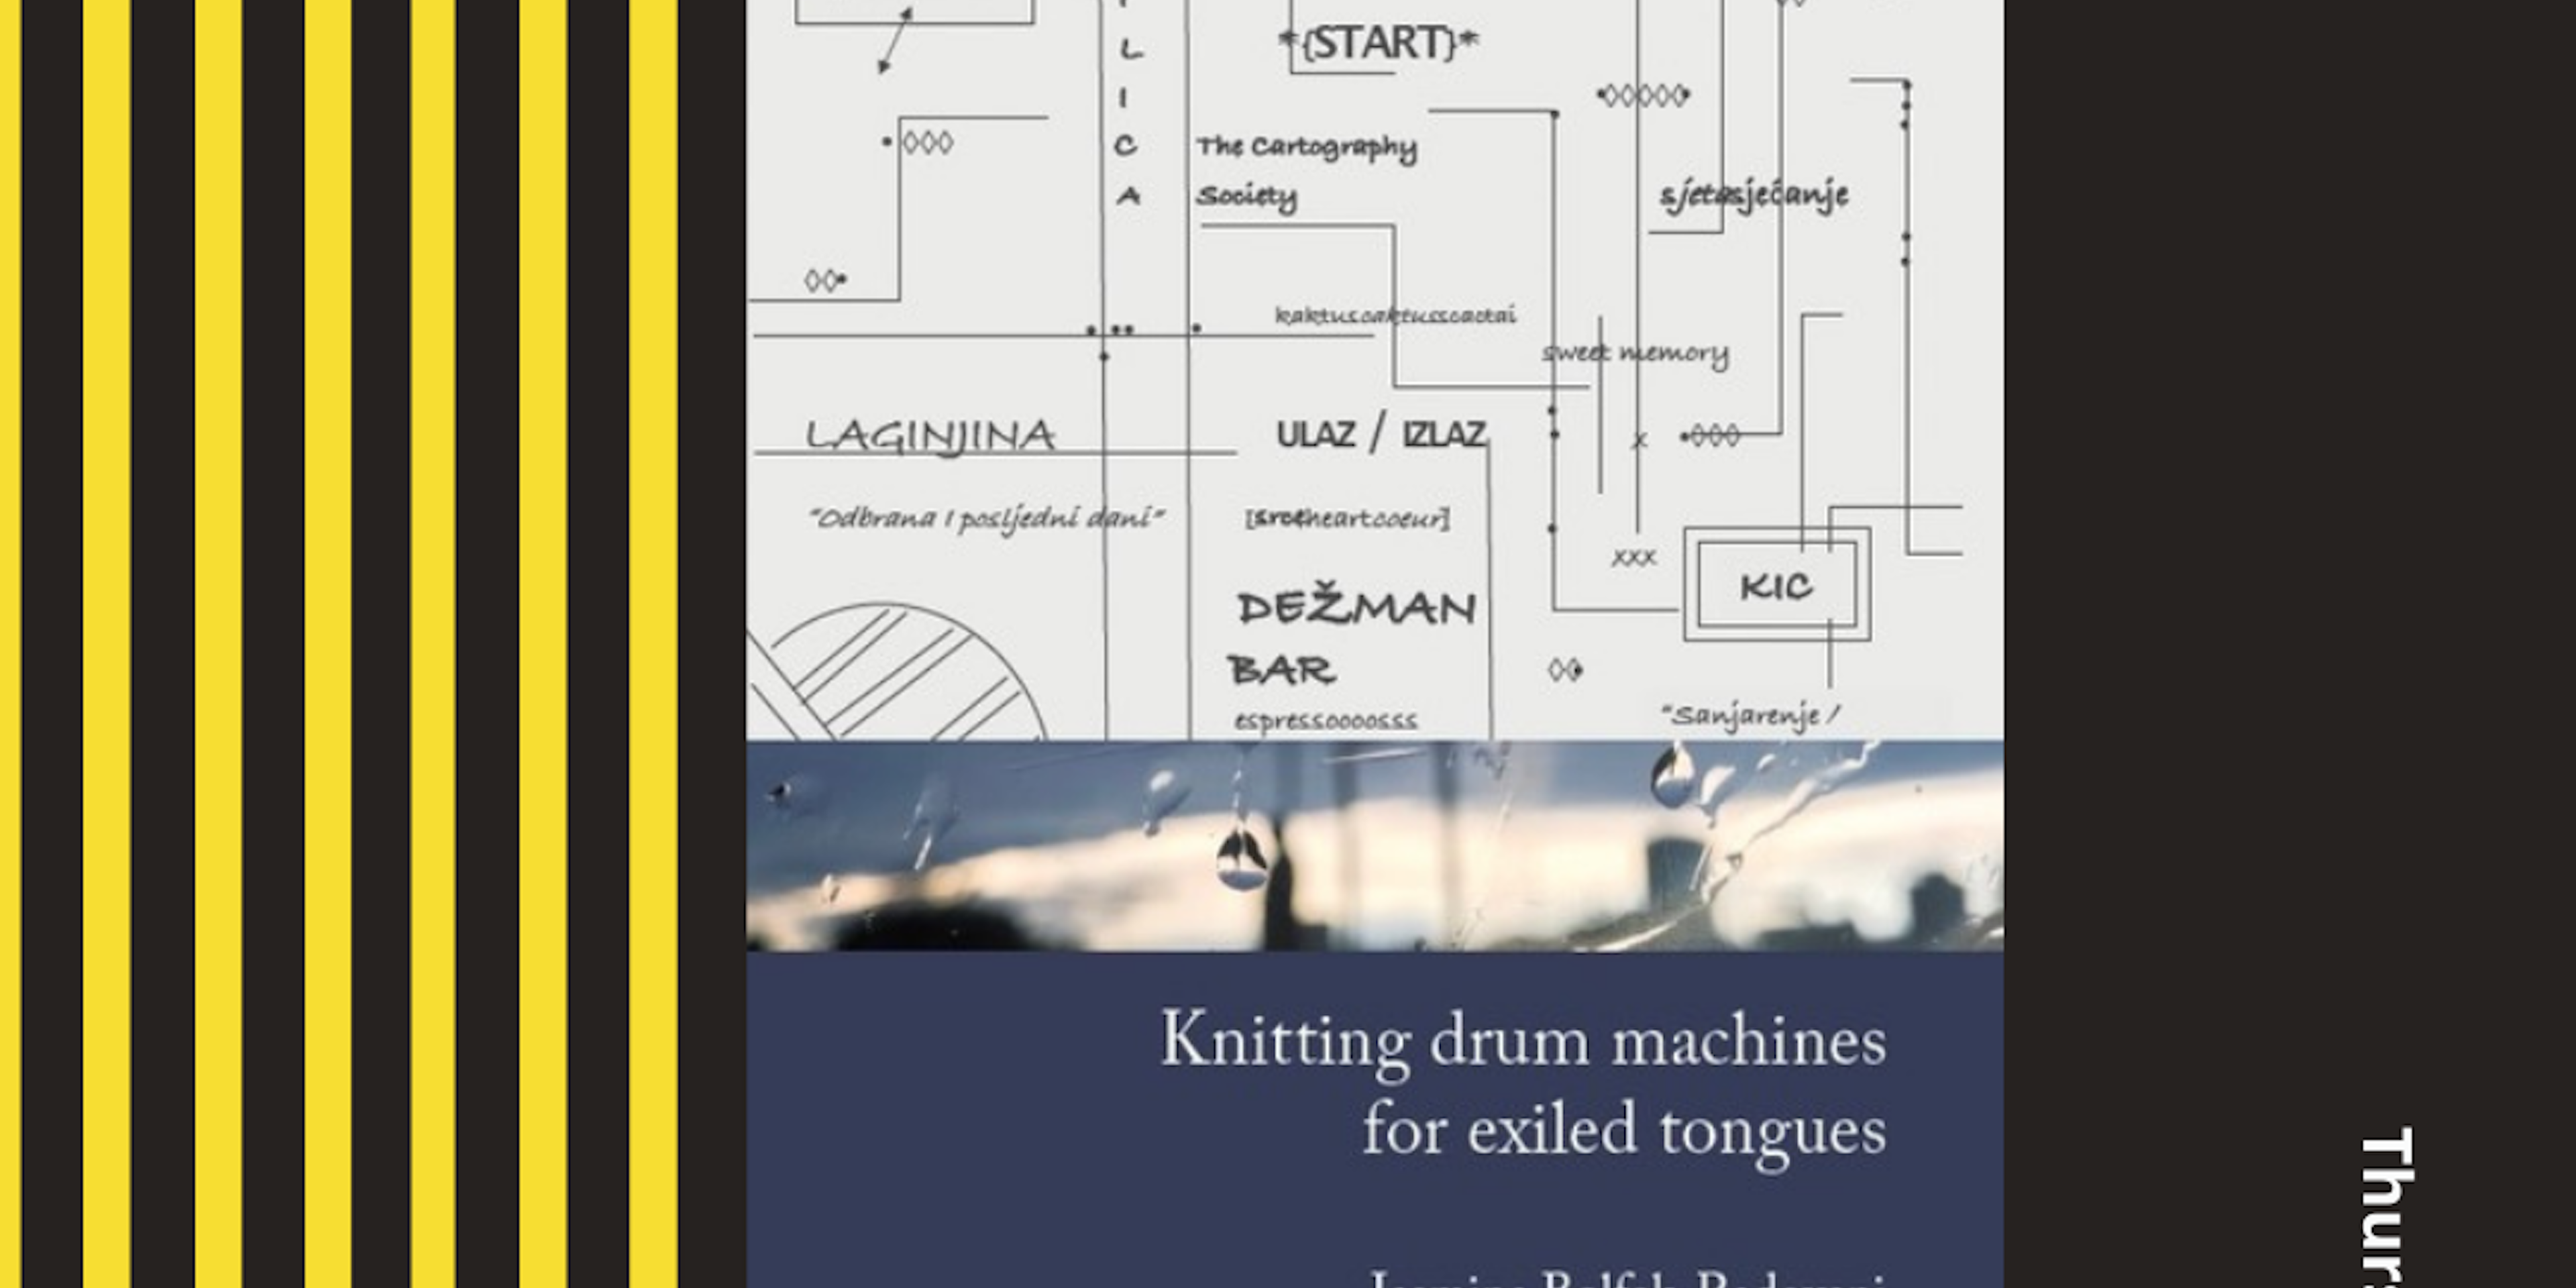 "Knitting drum machines for exiled tongues" book launch, 23 February, Morocco Bound bookshop